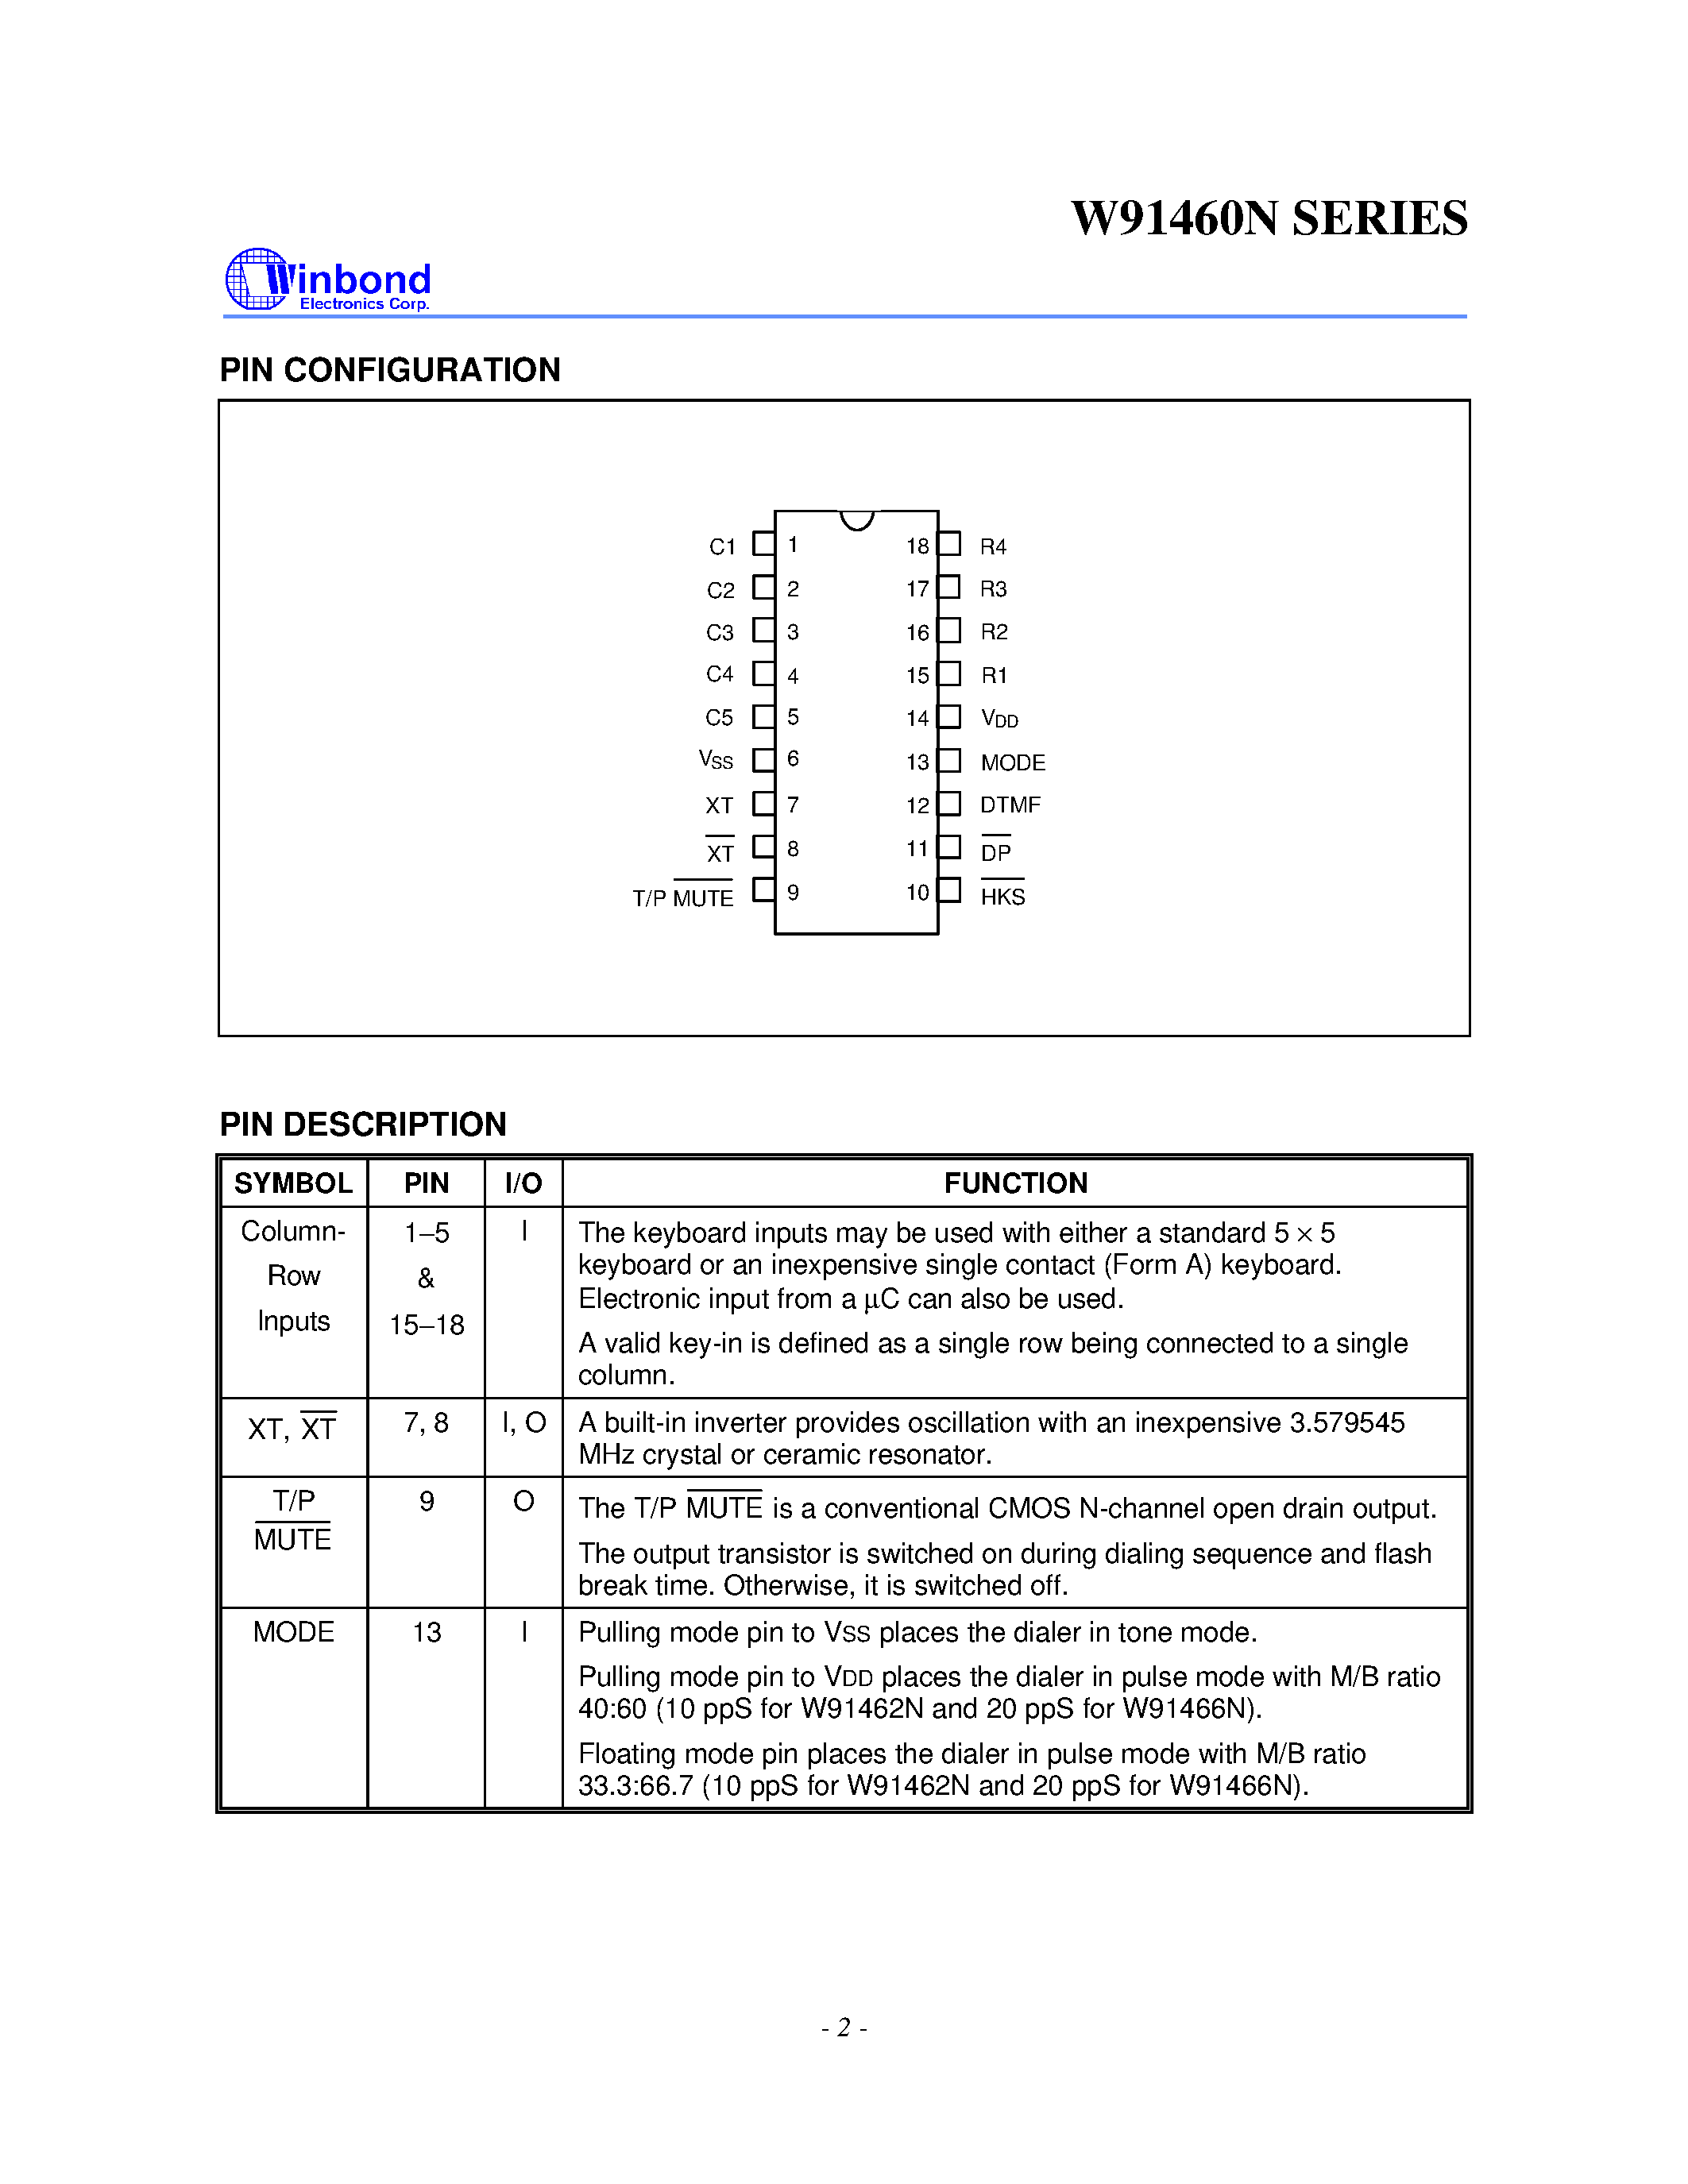 Datasheet W91460N - 3-MEMORY TONE/PULSE DIALER WITH SAVE FUNCTION page 2